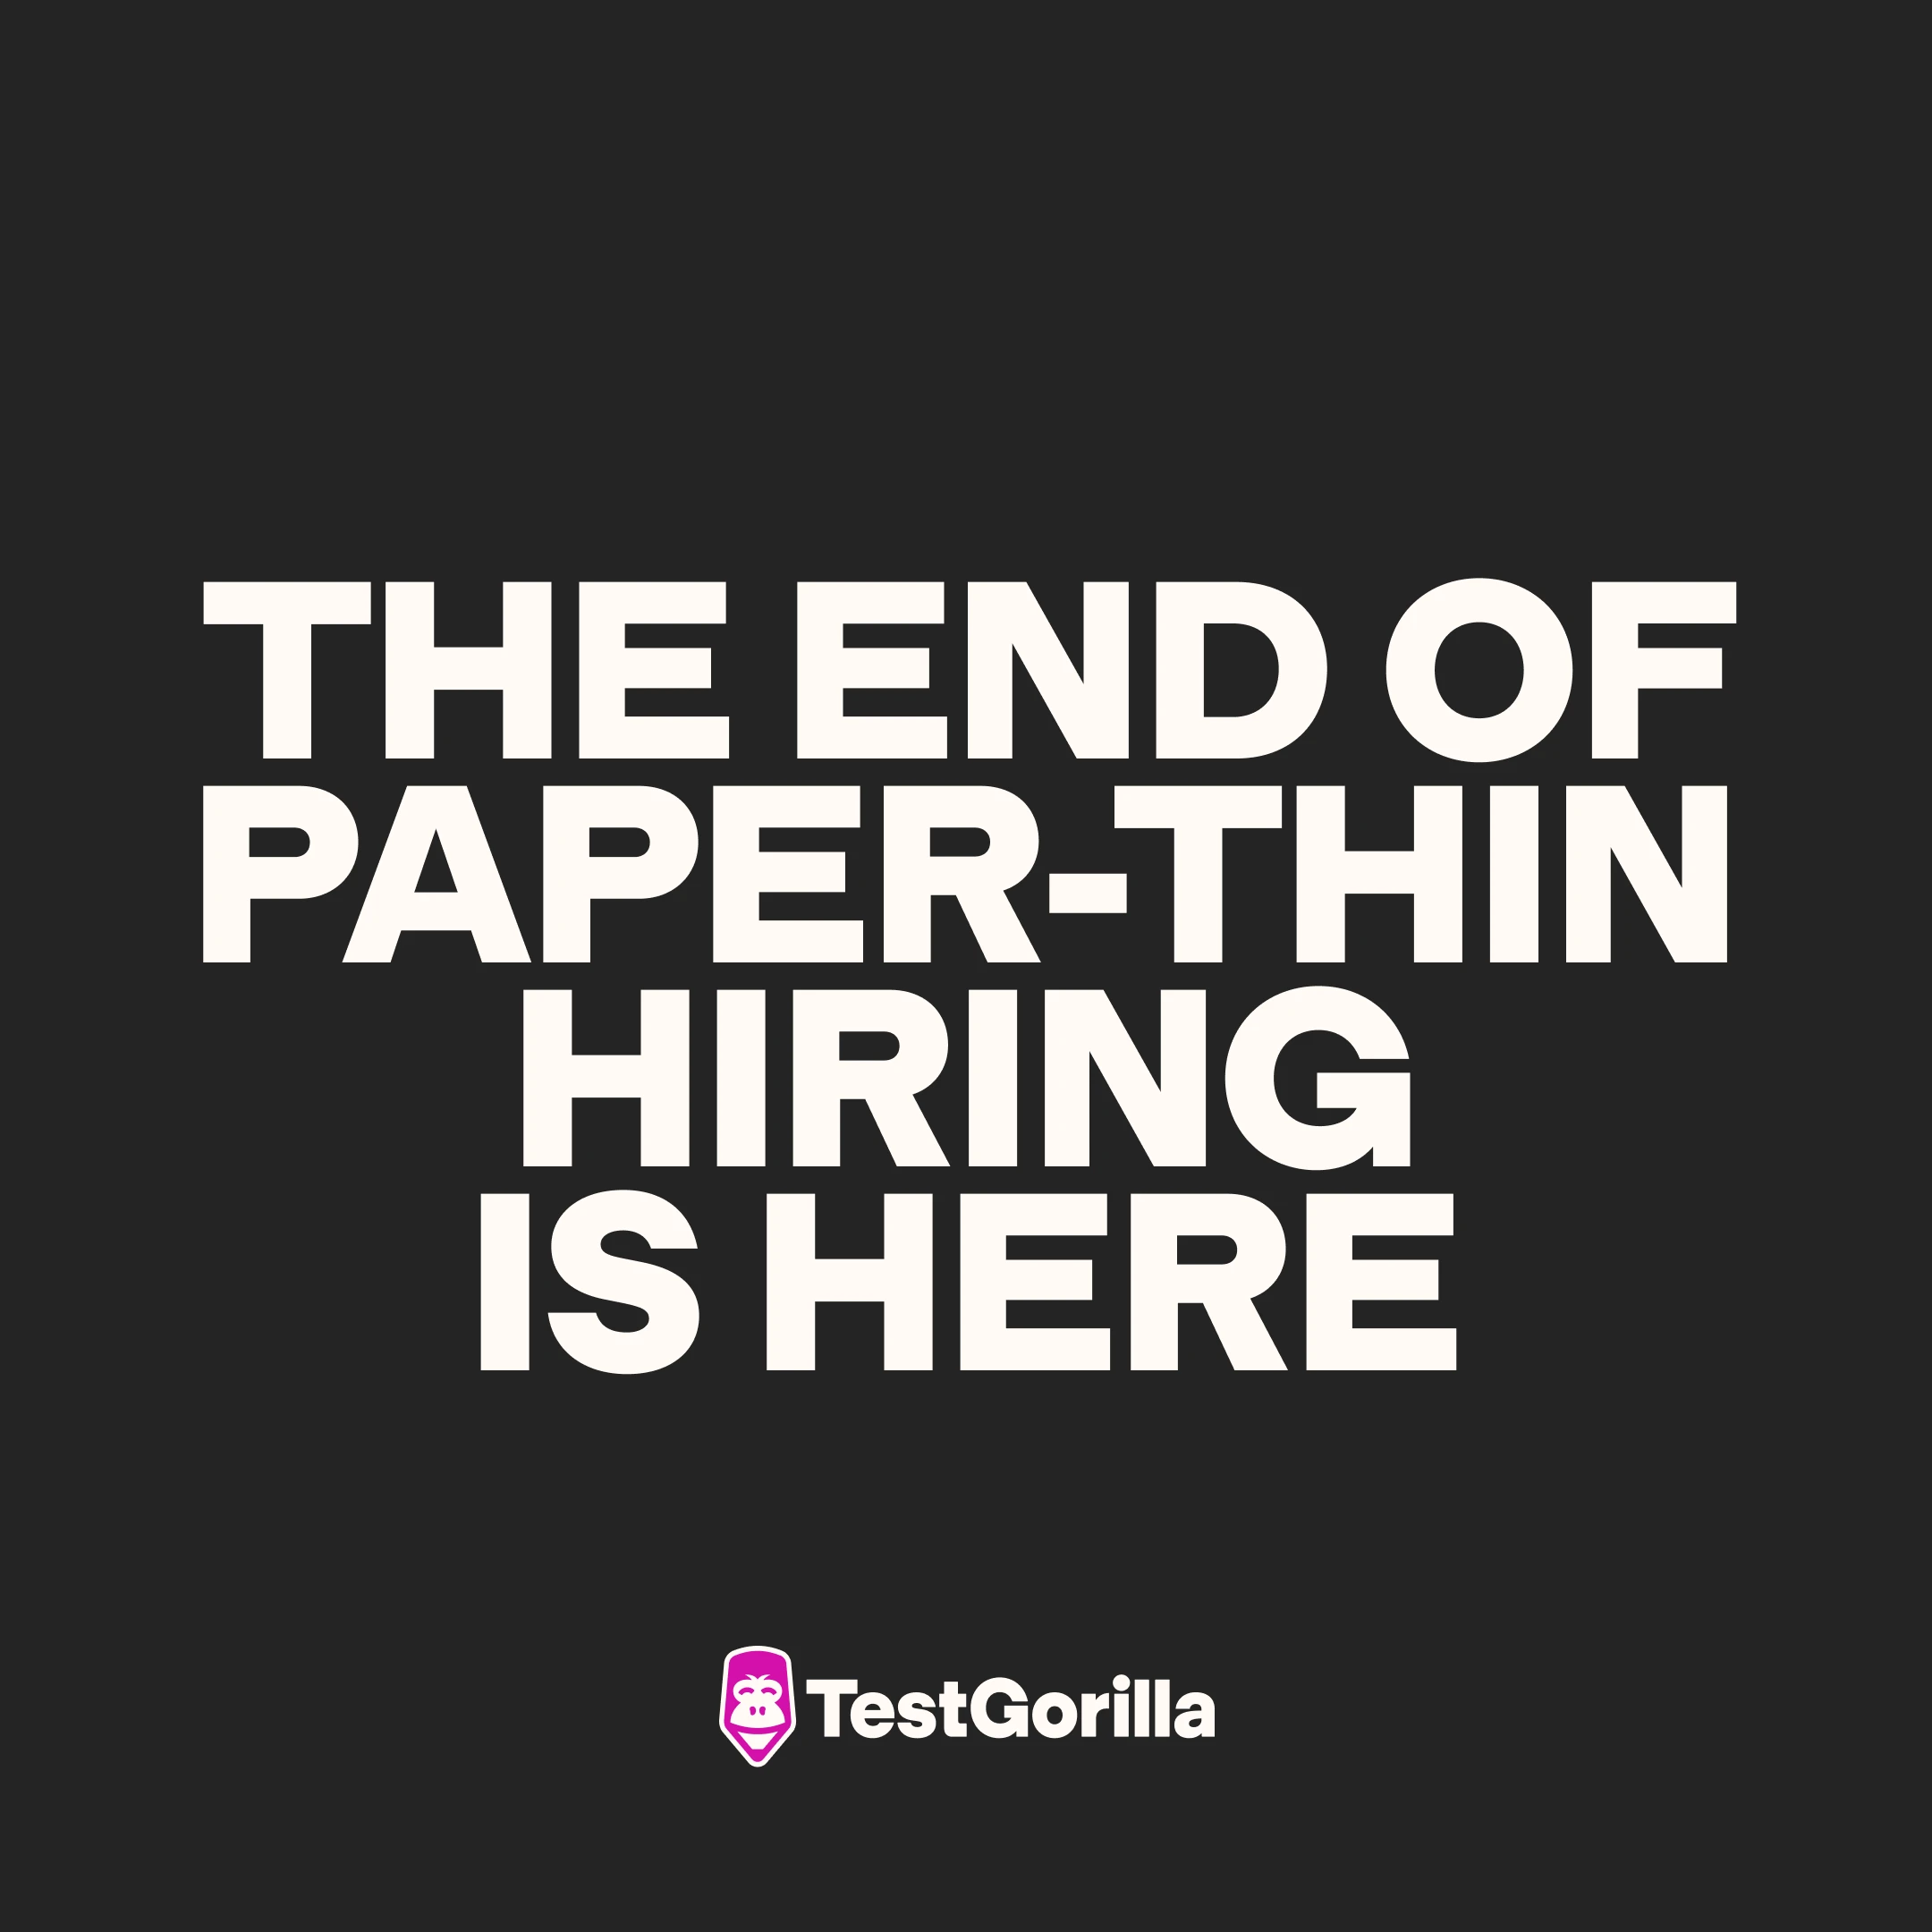 The end of paper-thin hiring